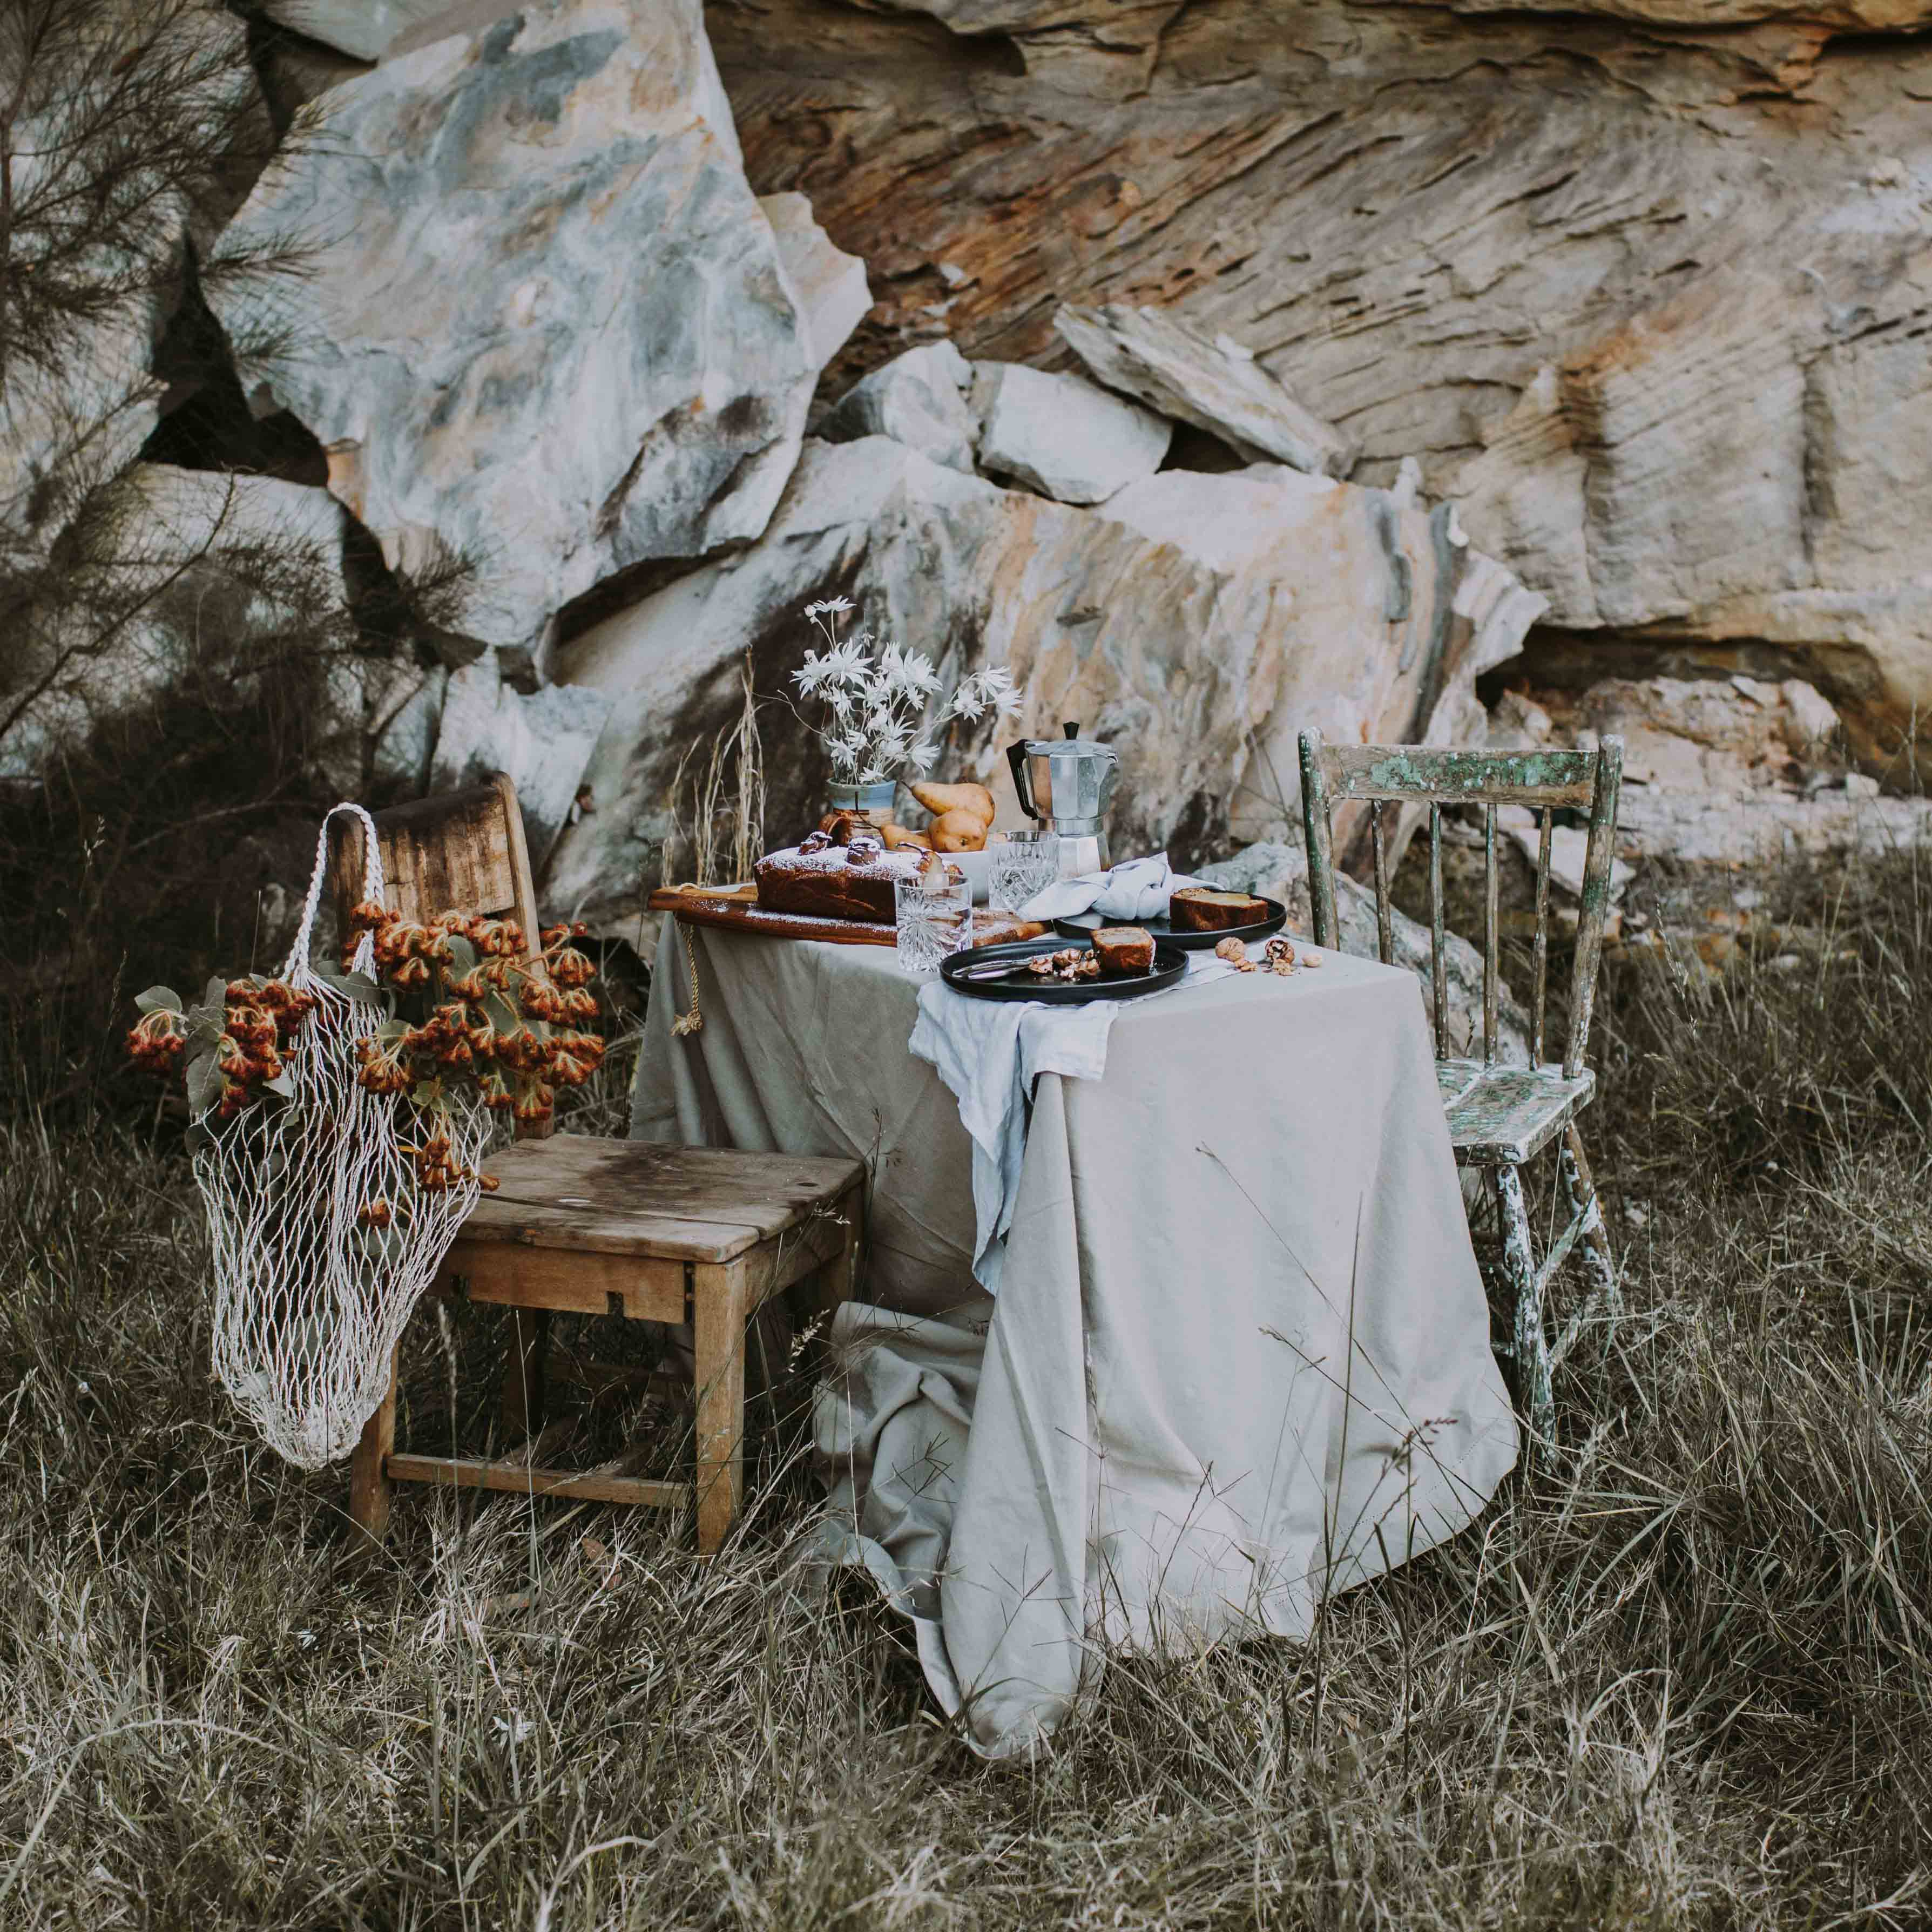 Australian outdoor dining with native wild flowers, homemade gluten free cake and Palinopsia ceramics handmade Sabe dinner set in black, grey and blue 